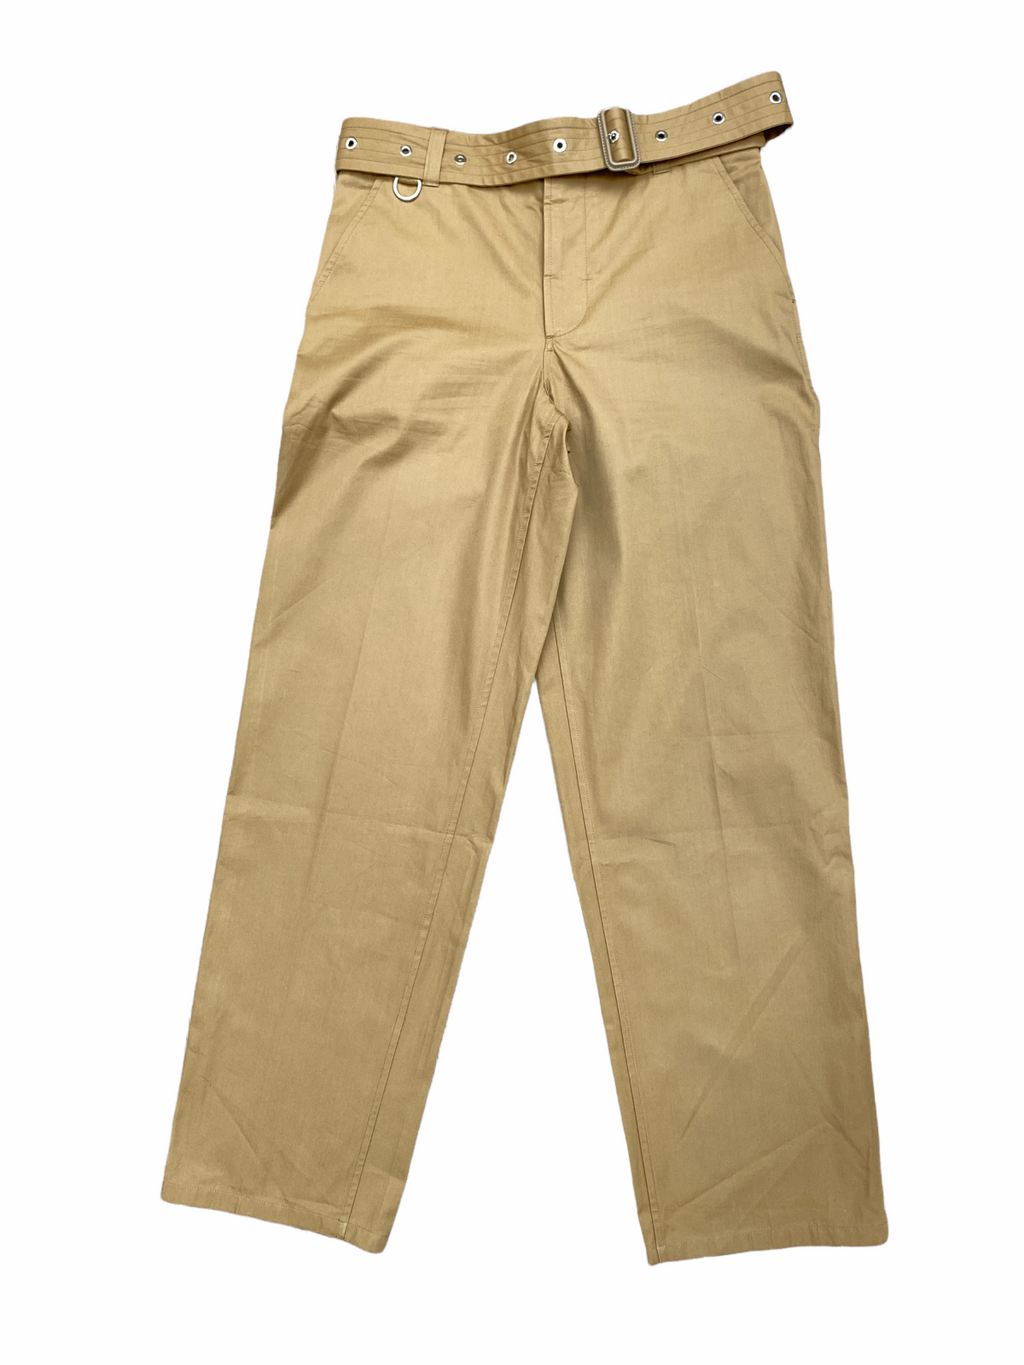 Brown Belted Chino Pants